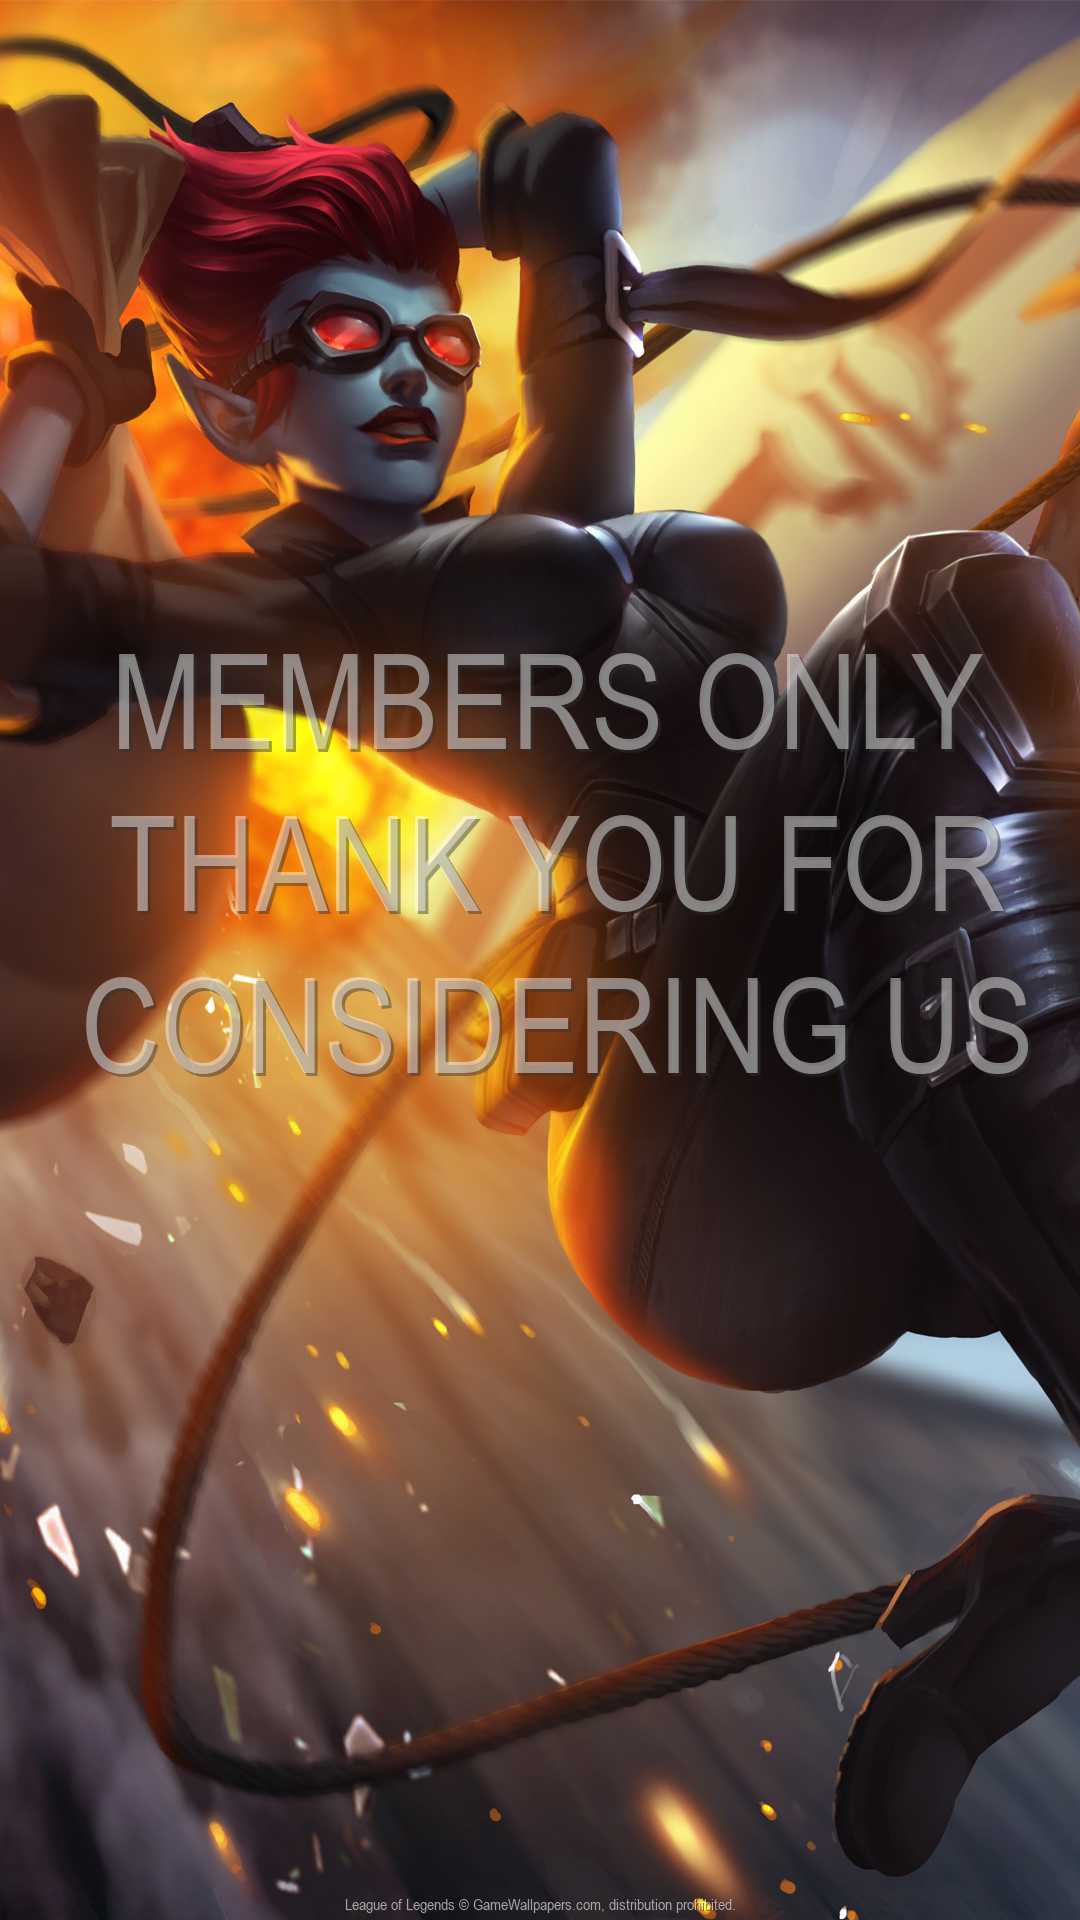 League of Legends 1080p Vertical Mobile wallpaper or background 36